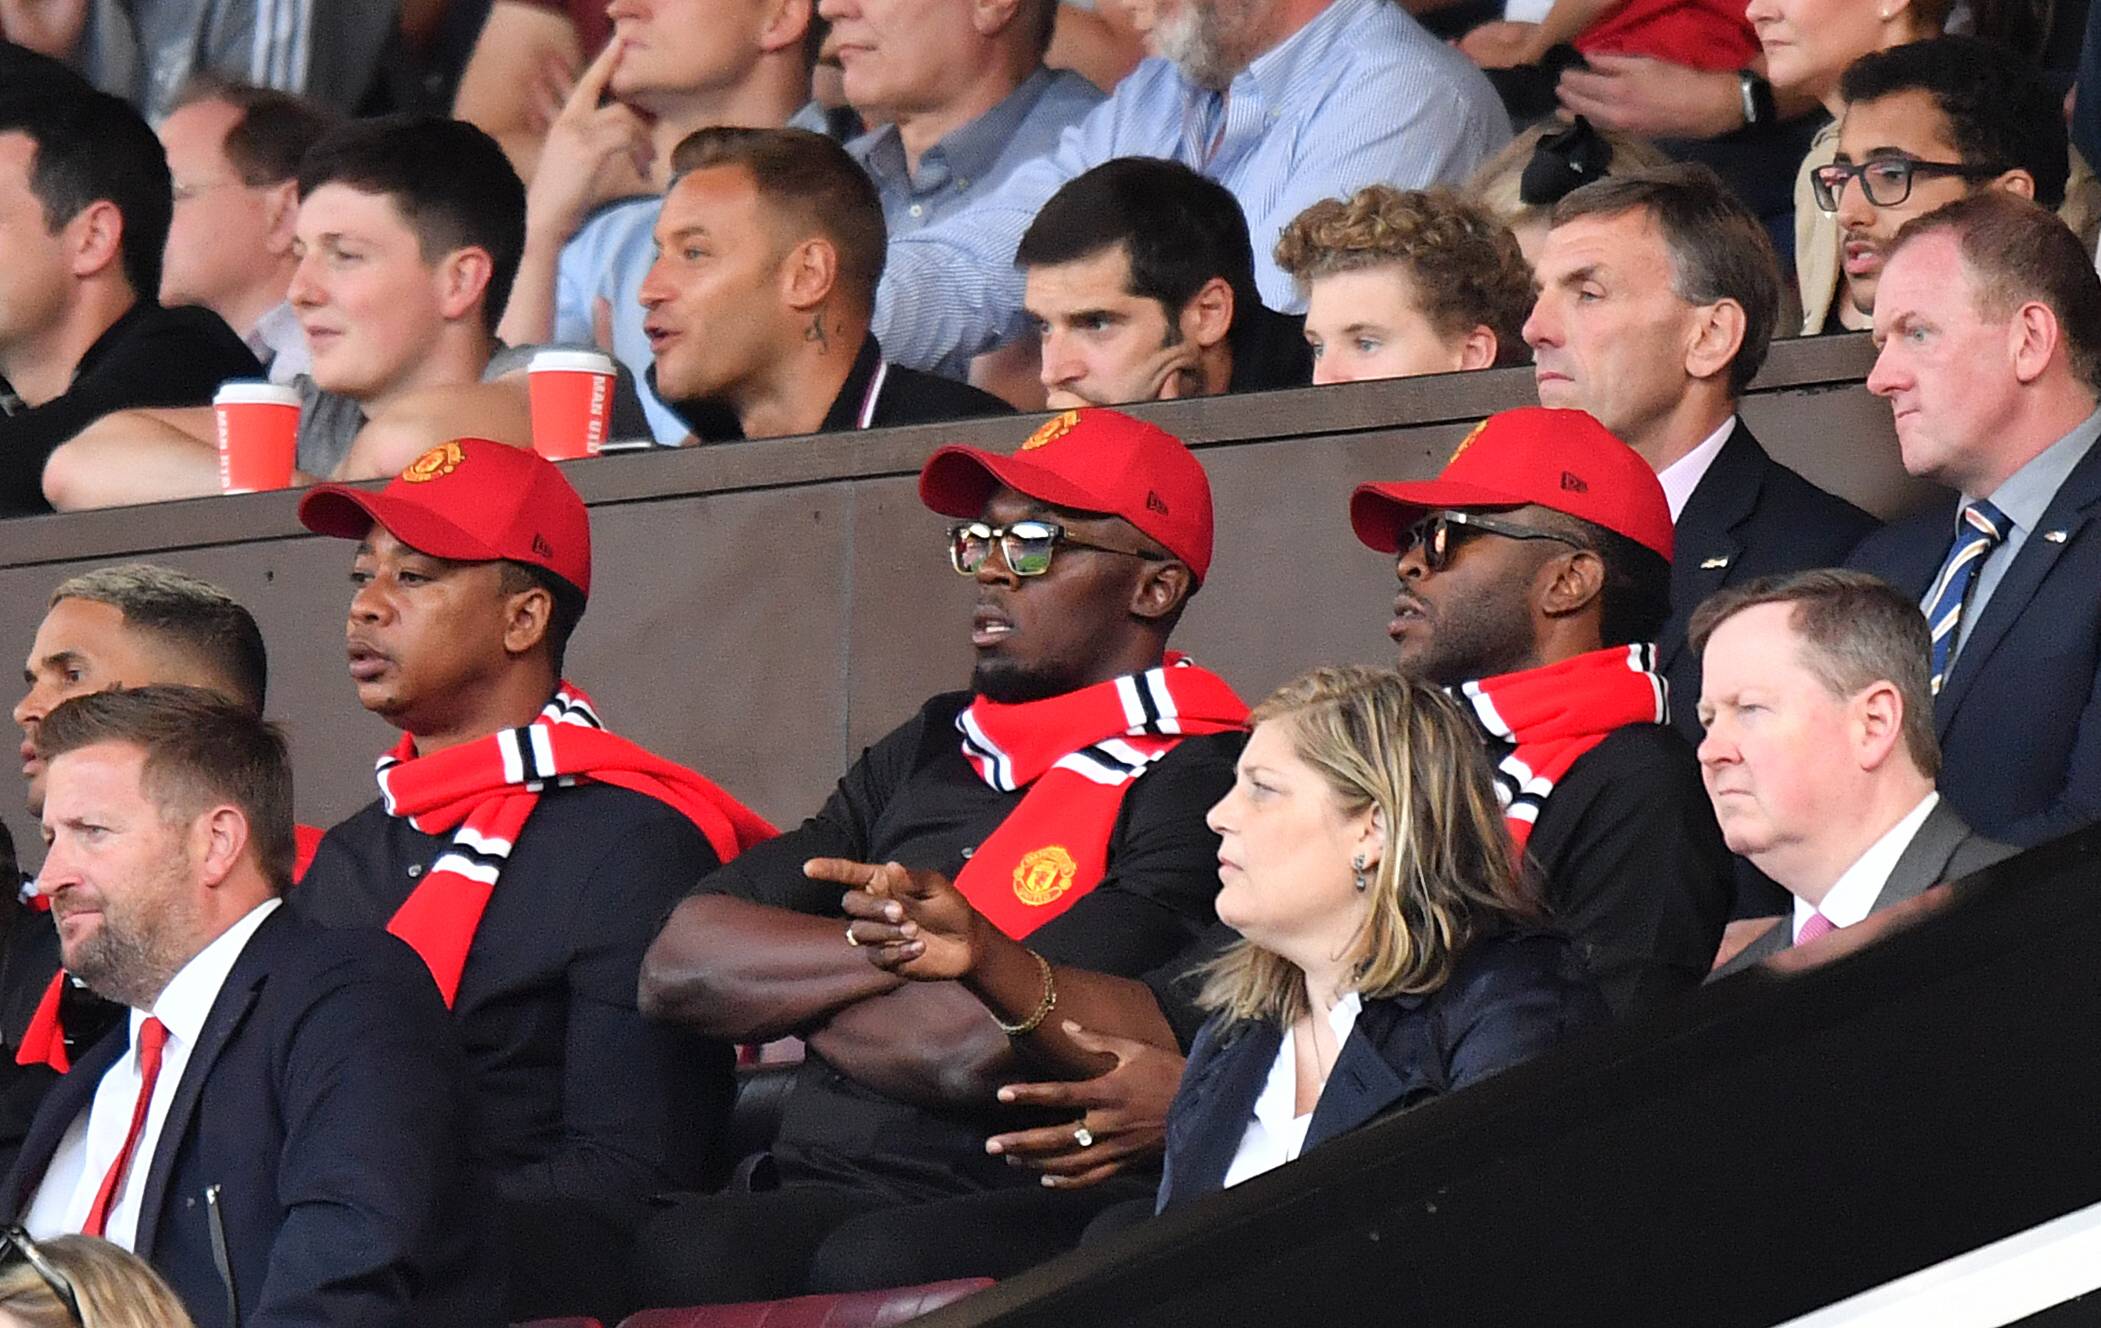 Usain Bolt in attendance at Old Trafford as Manchester United face Leicester City. (imago Images)